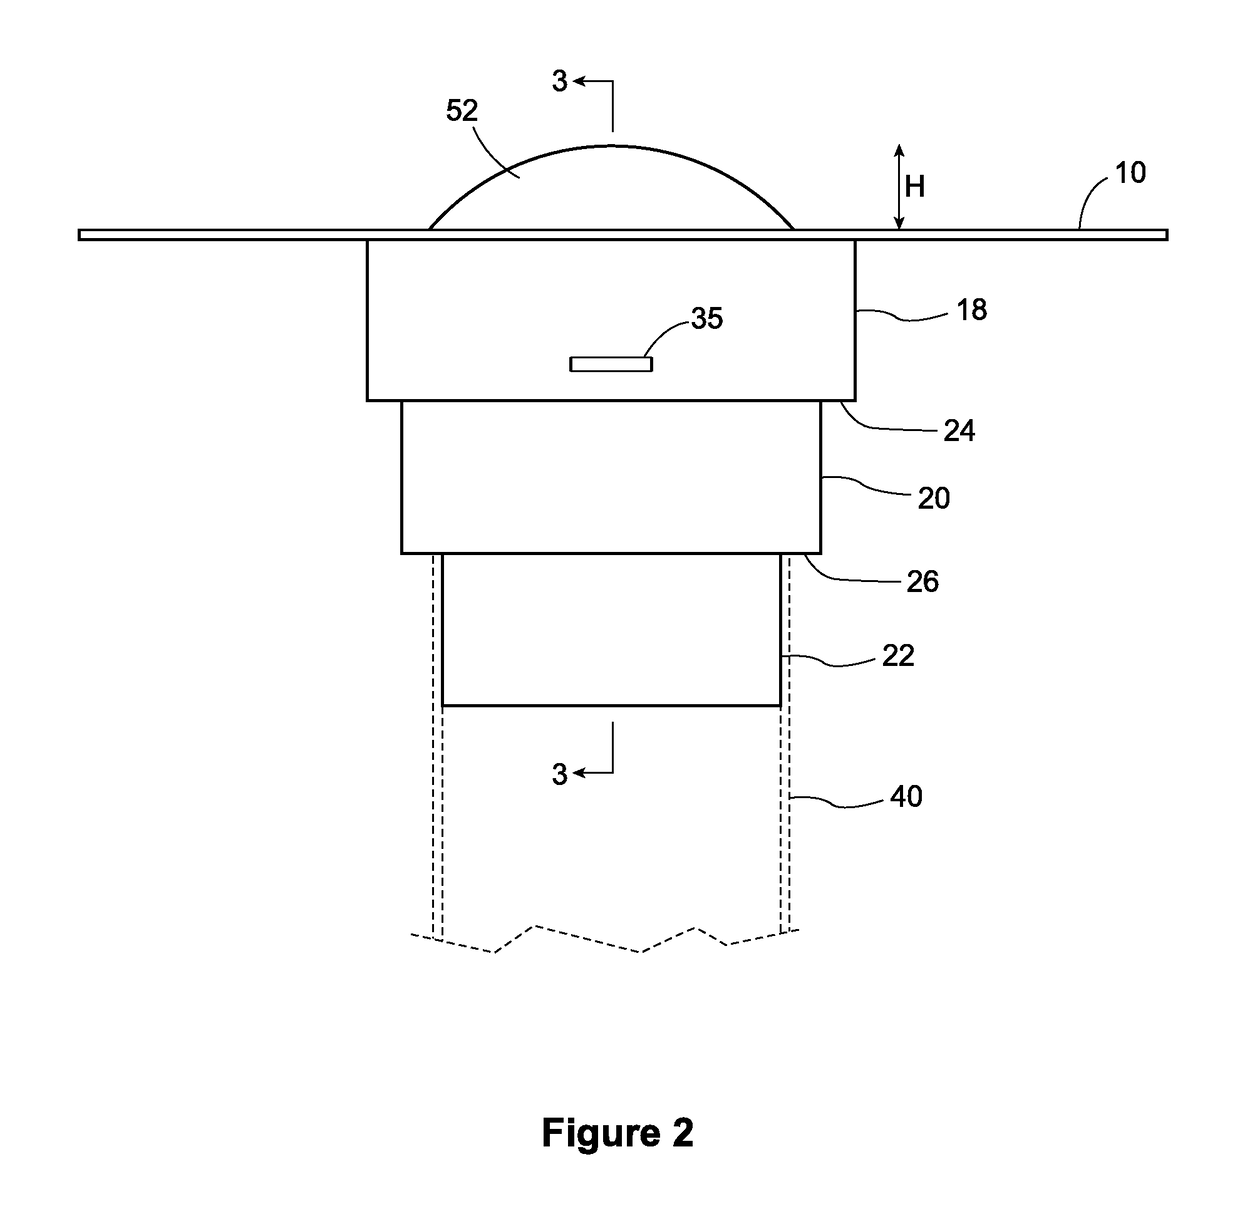 Flapper valve adaptor for a roof vent and method of installing the same